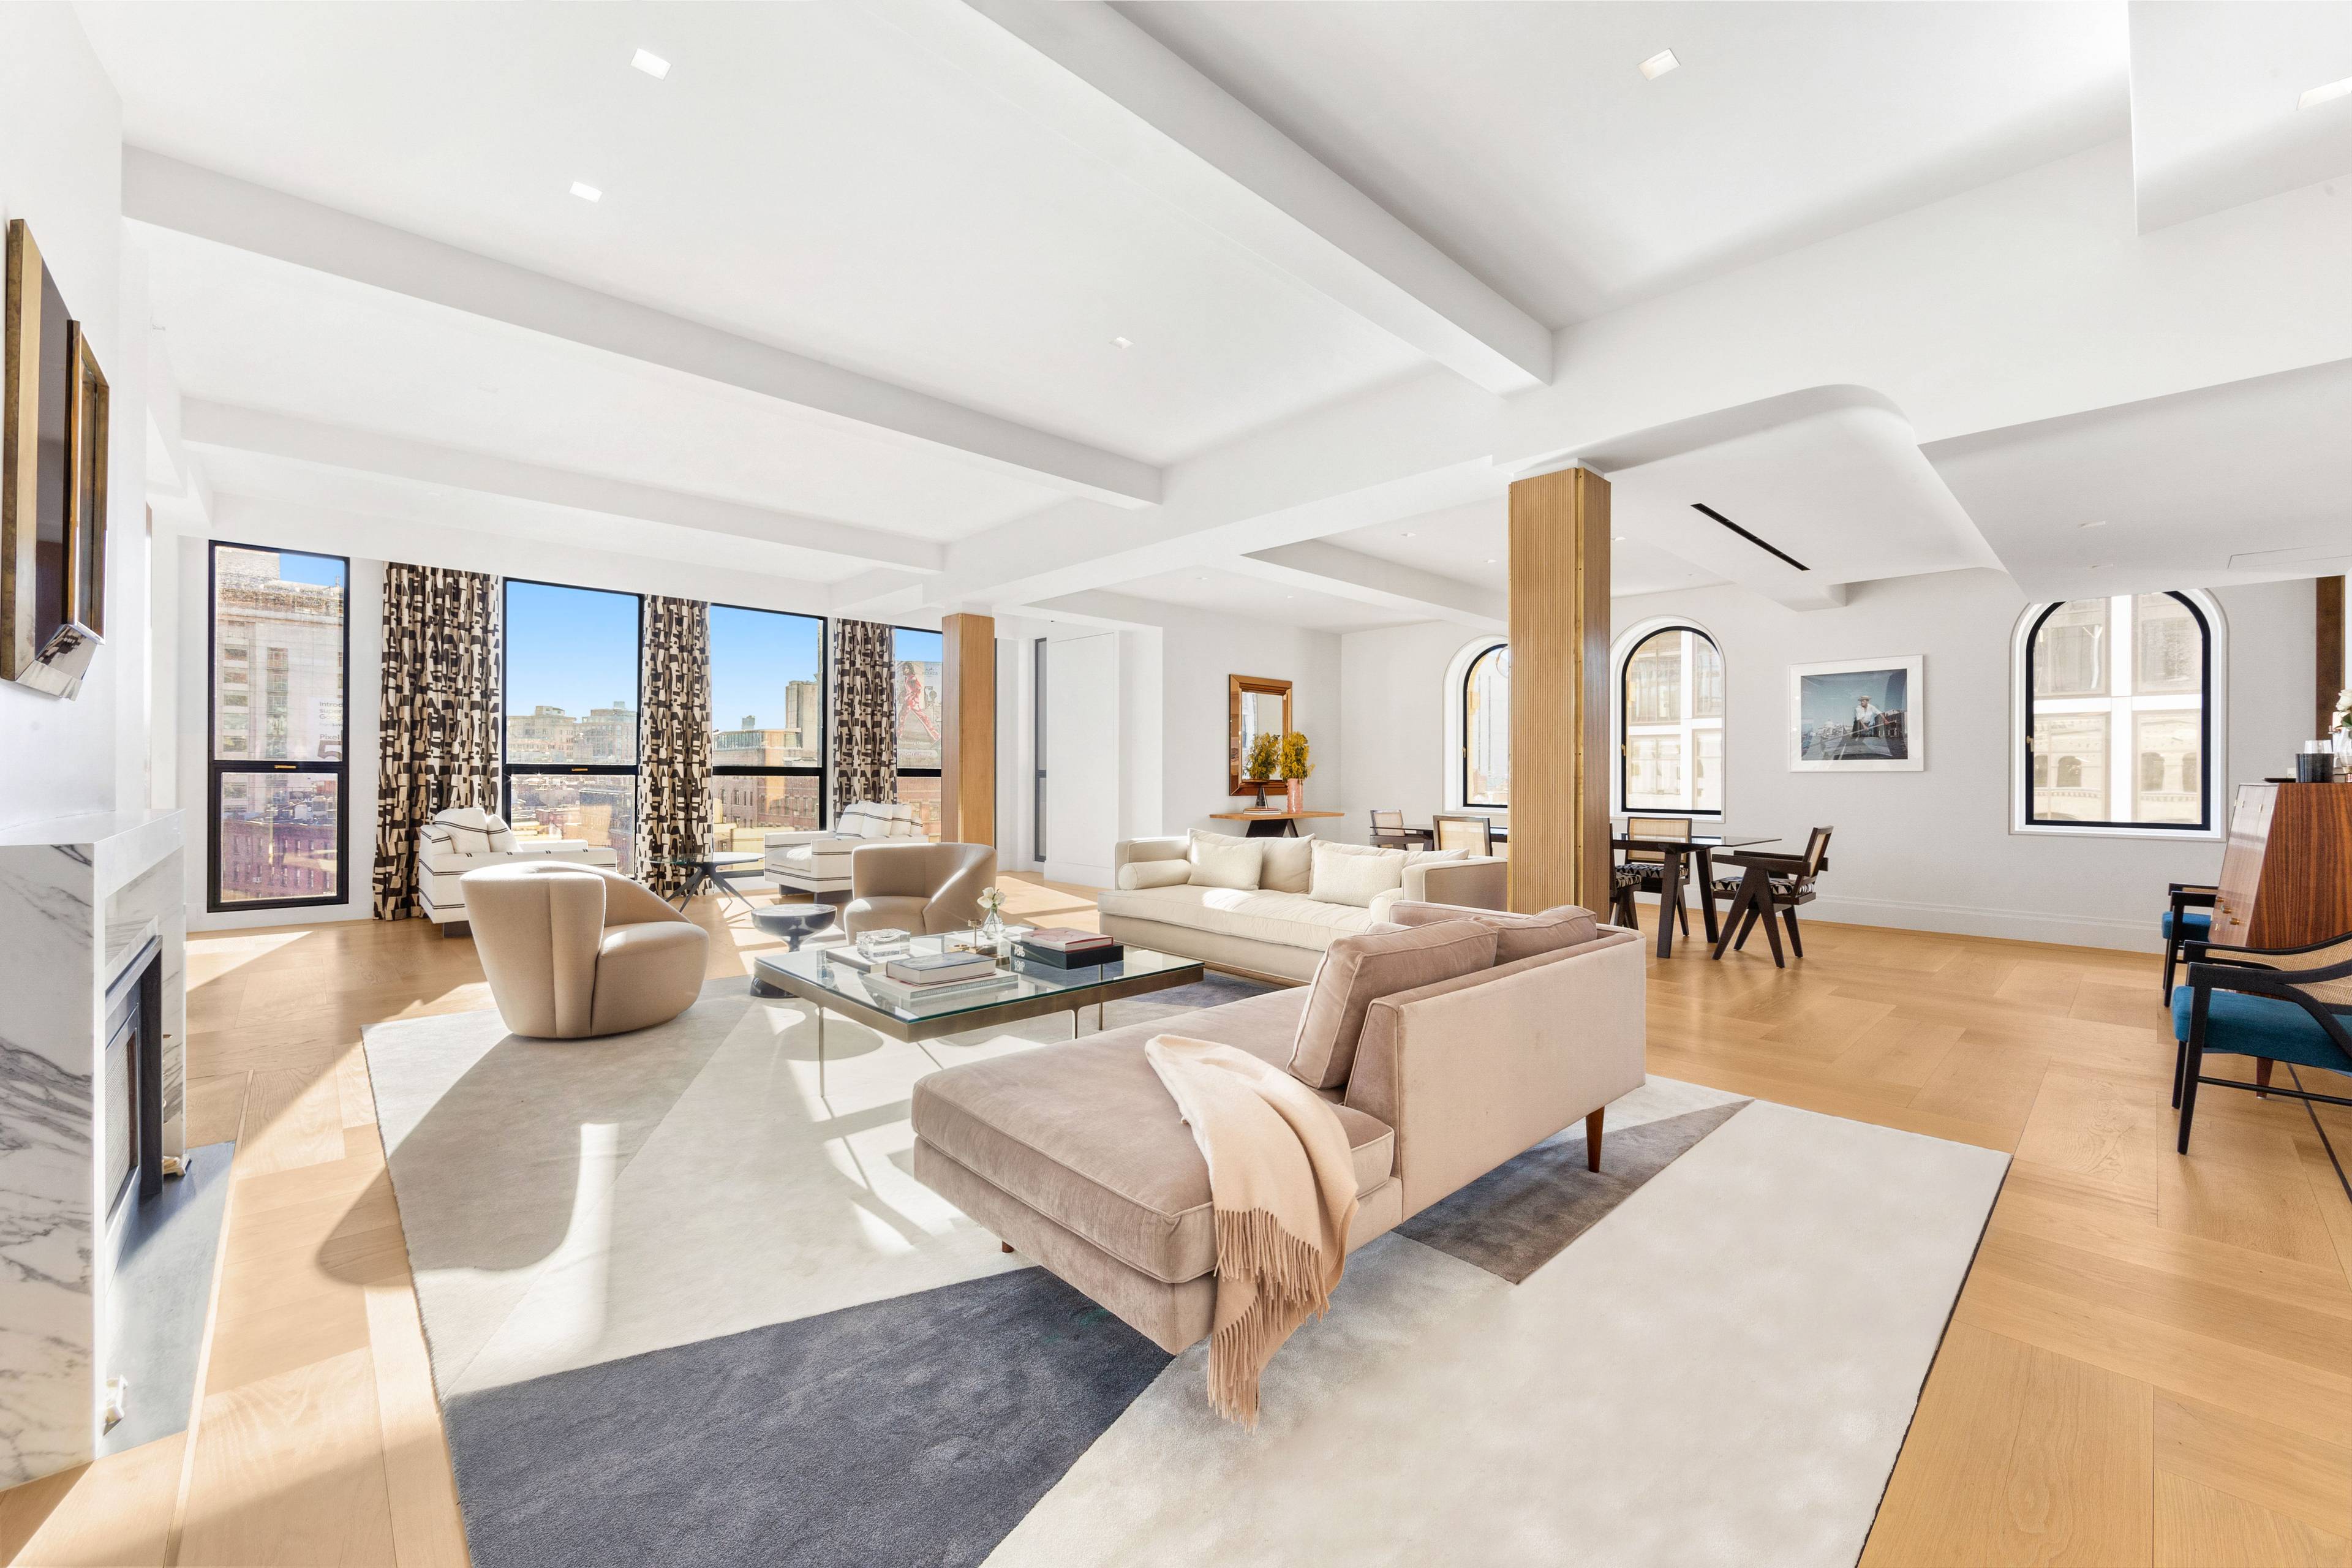 66 NINTH AVENUE | CONCIERGE LEVEL BOUTIQUE CONDO | 5,444SF FULL FLOOR 5 BEDROOM with PRIVATE TERRACE |